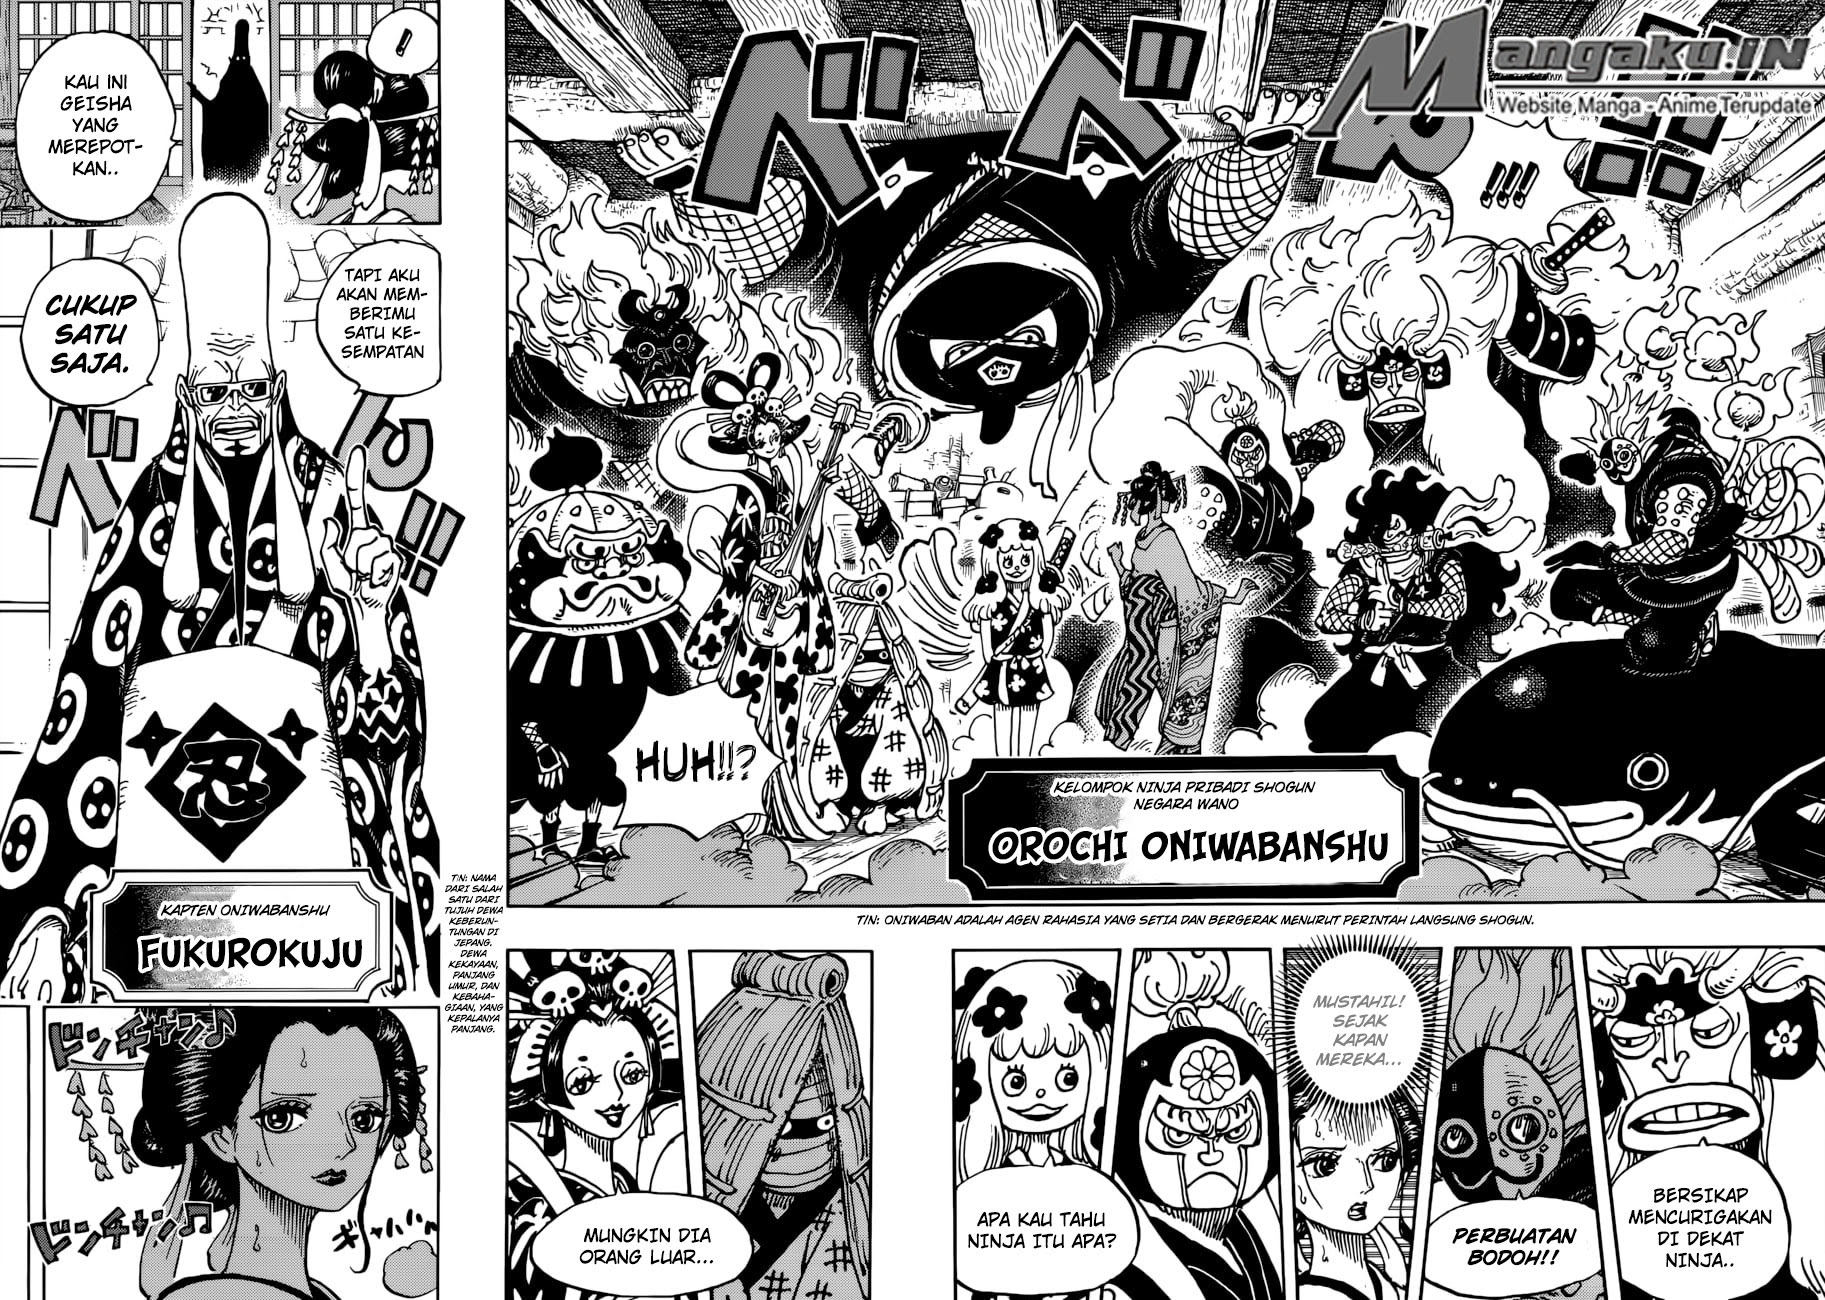 One Piece Chapter 931